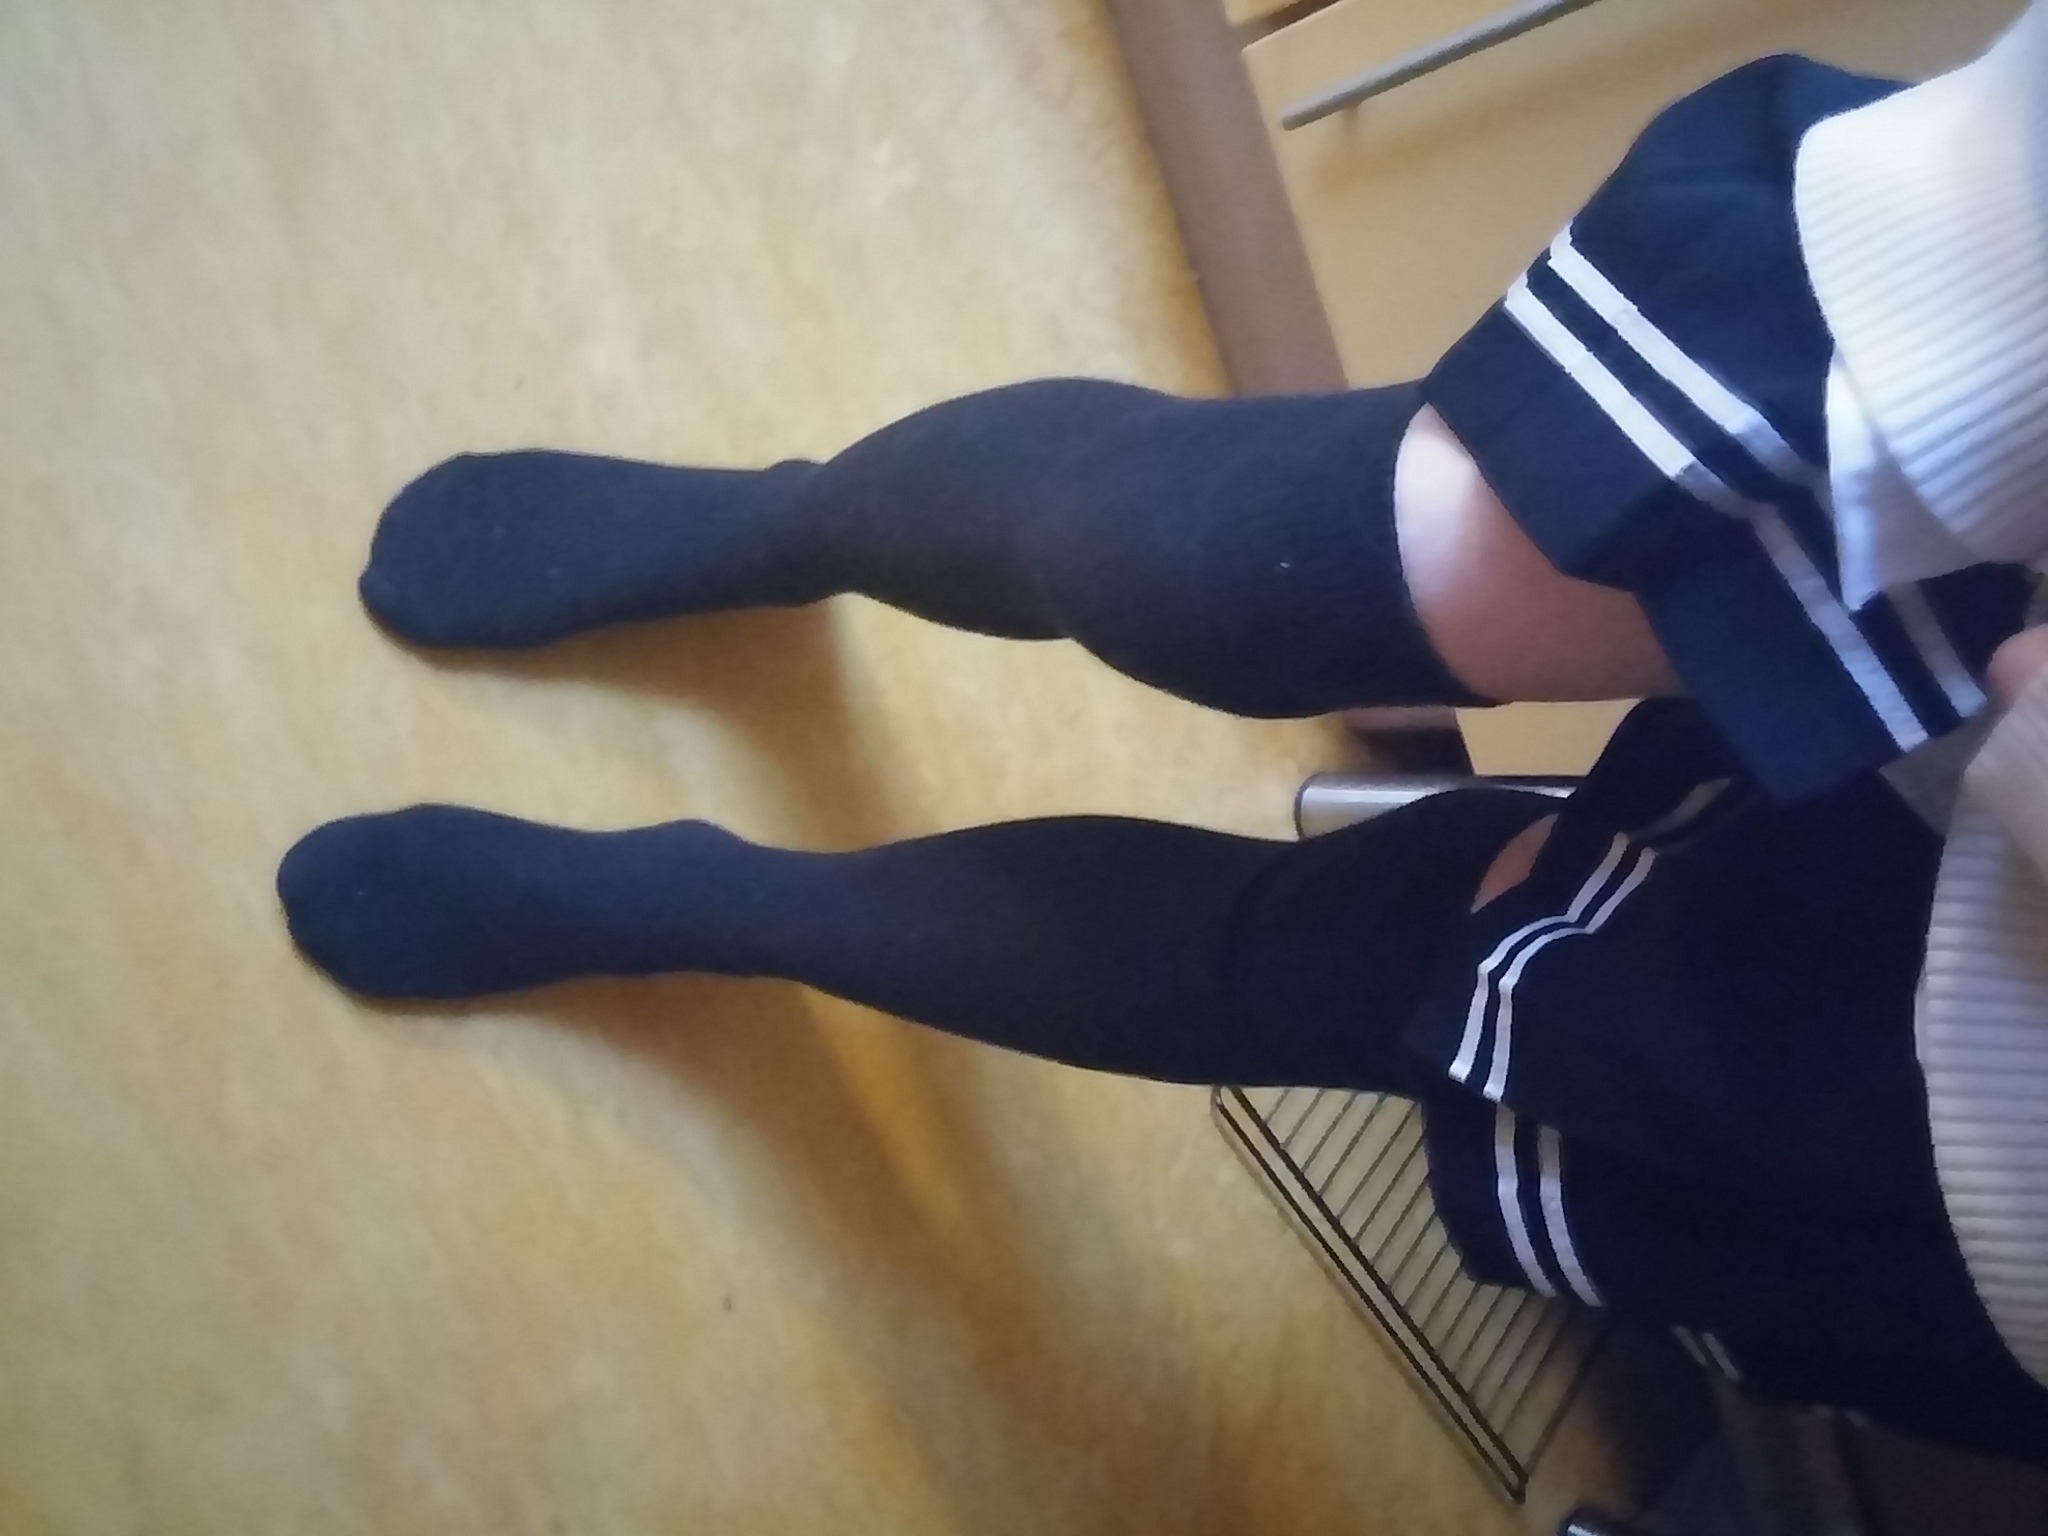 Post your Legs